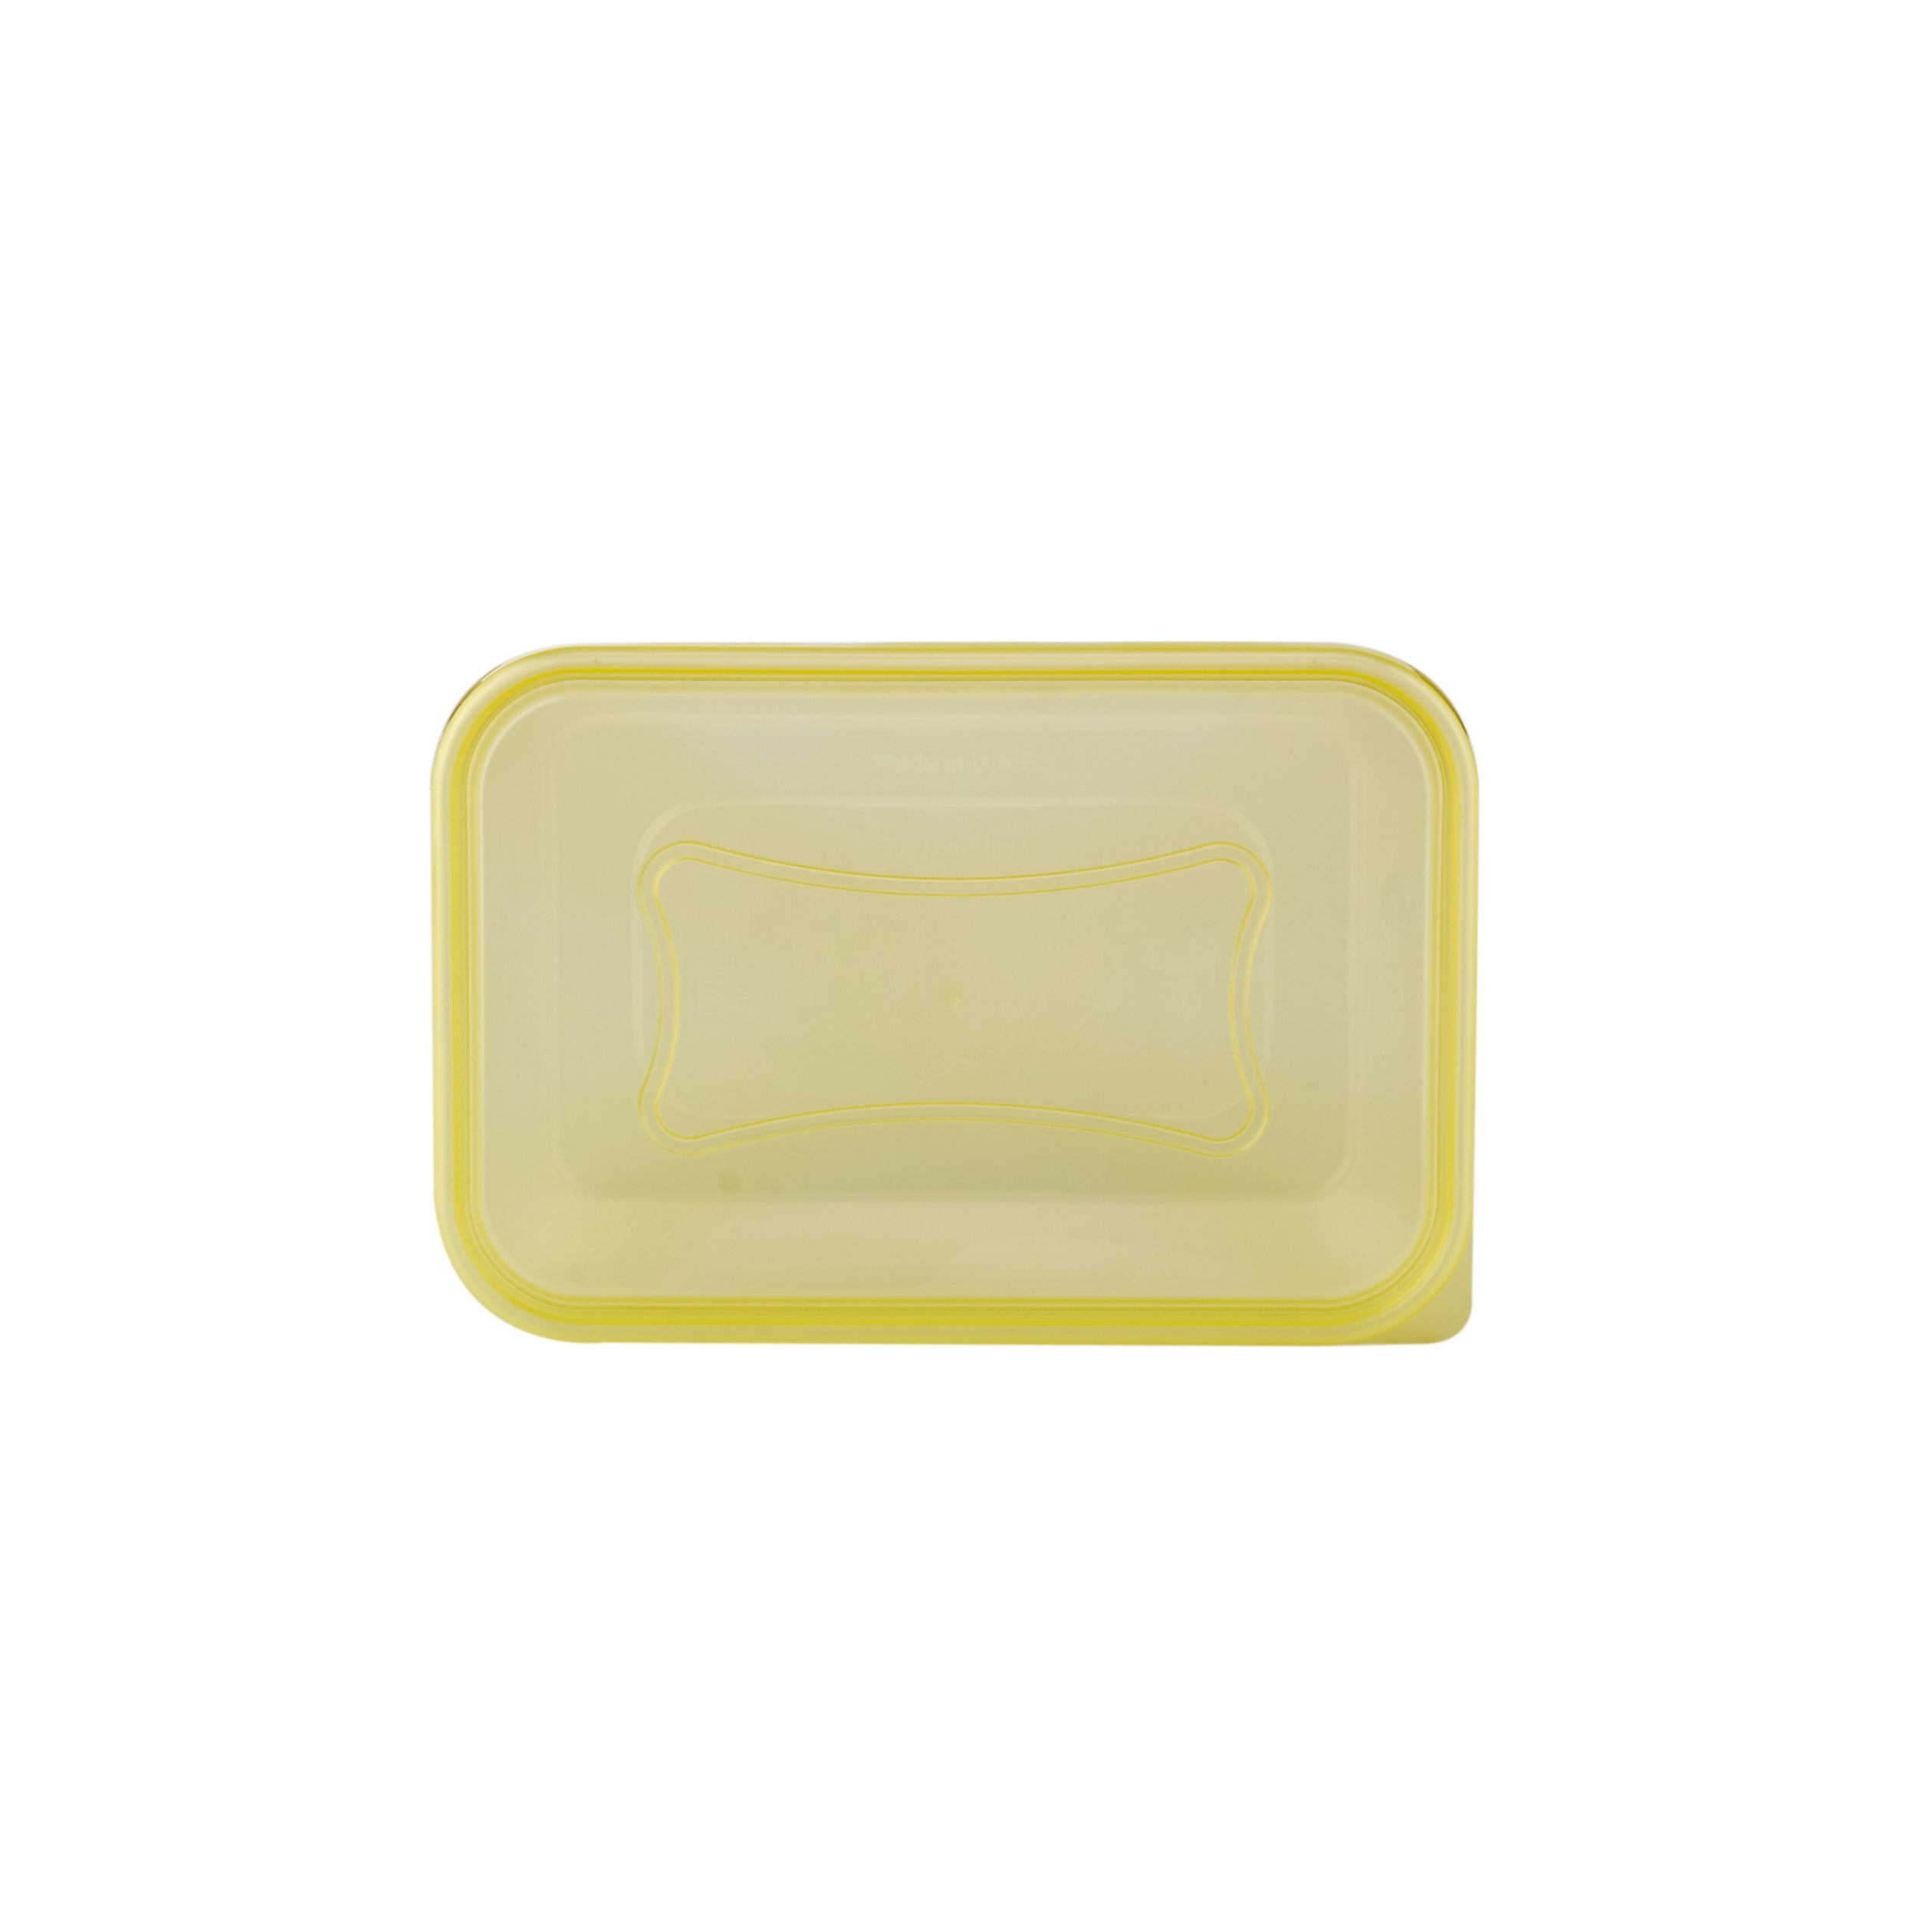 Clear Microwavable Rectangle Container with color Lids